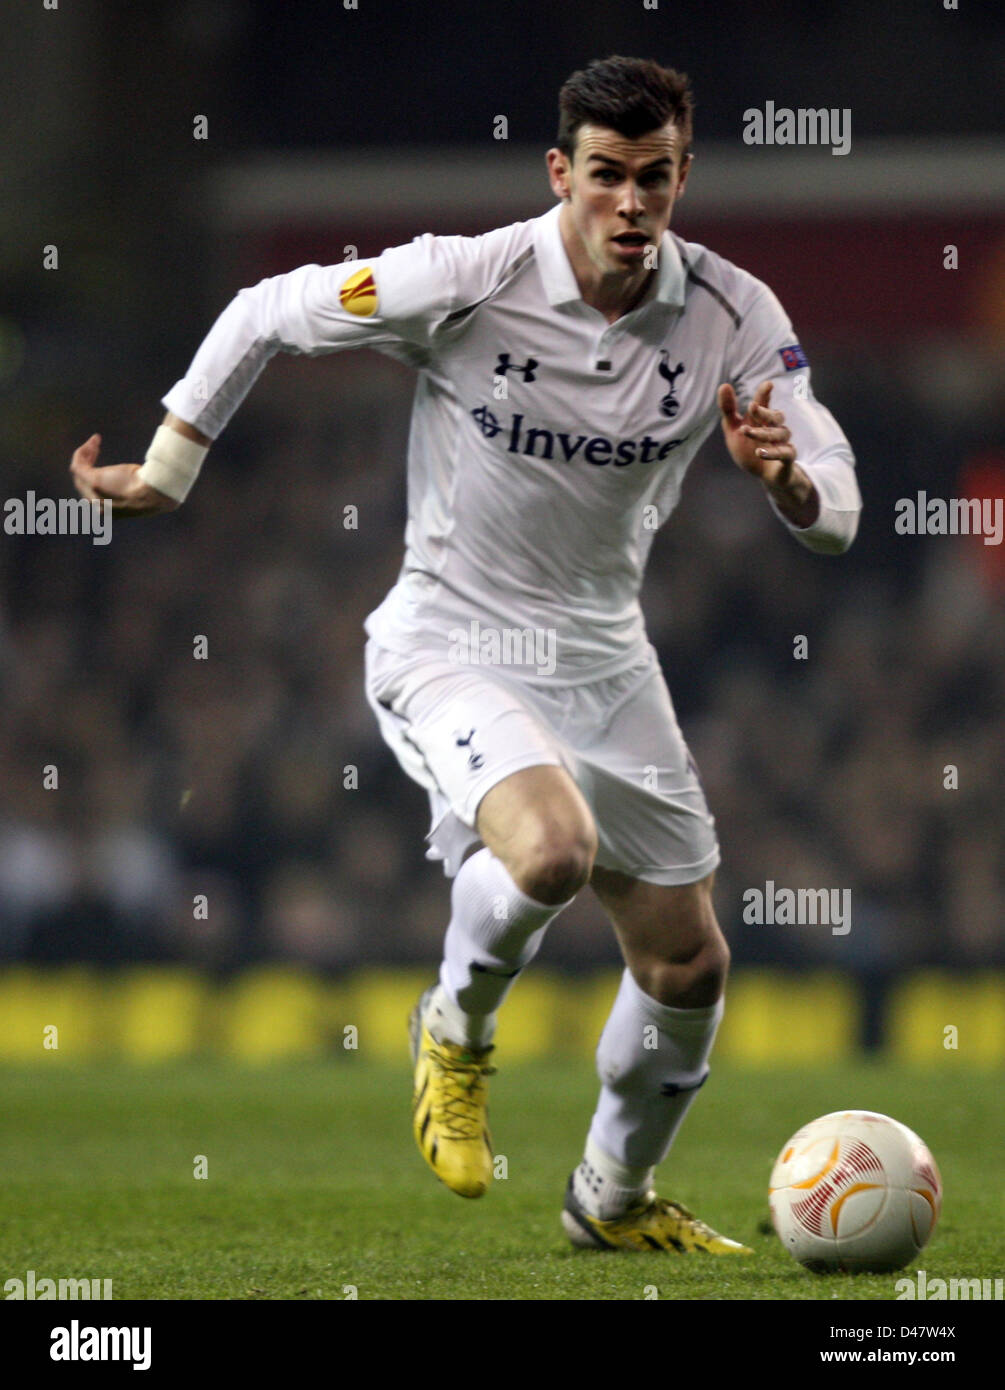 07.03.2013 London, England. Gareth Bale of Tottenham Hotspur during  the Europa League game between Tottenham Hotspur and Inter Milan from White Hart Lane. Tottenham won the first leg tie by a score of 3-0. Stock Photo